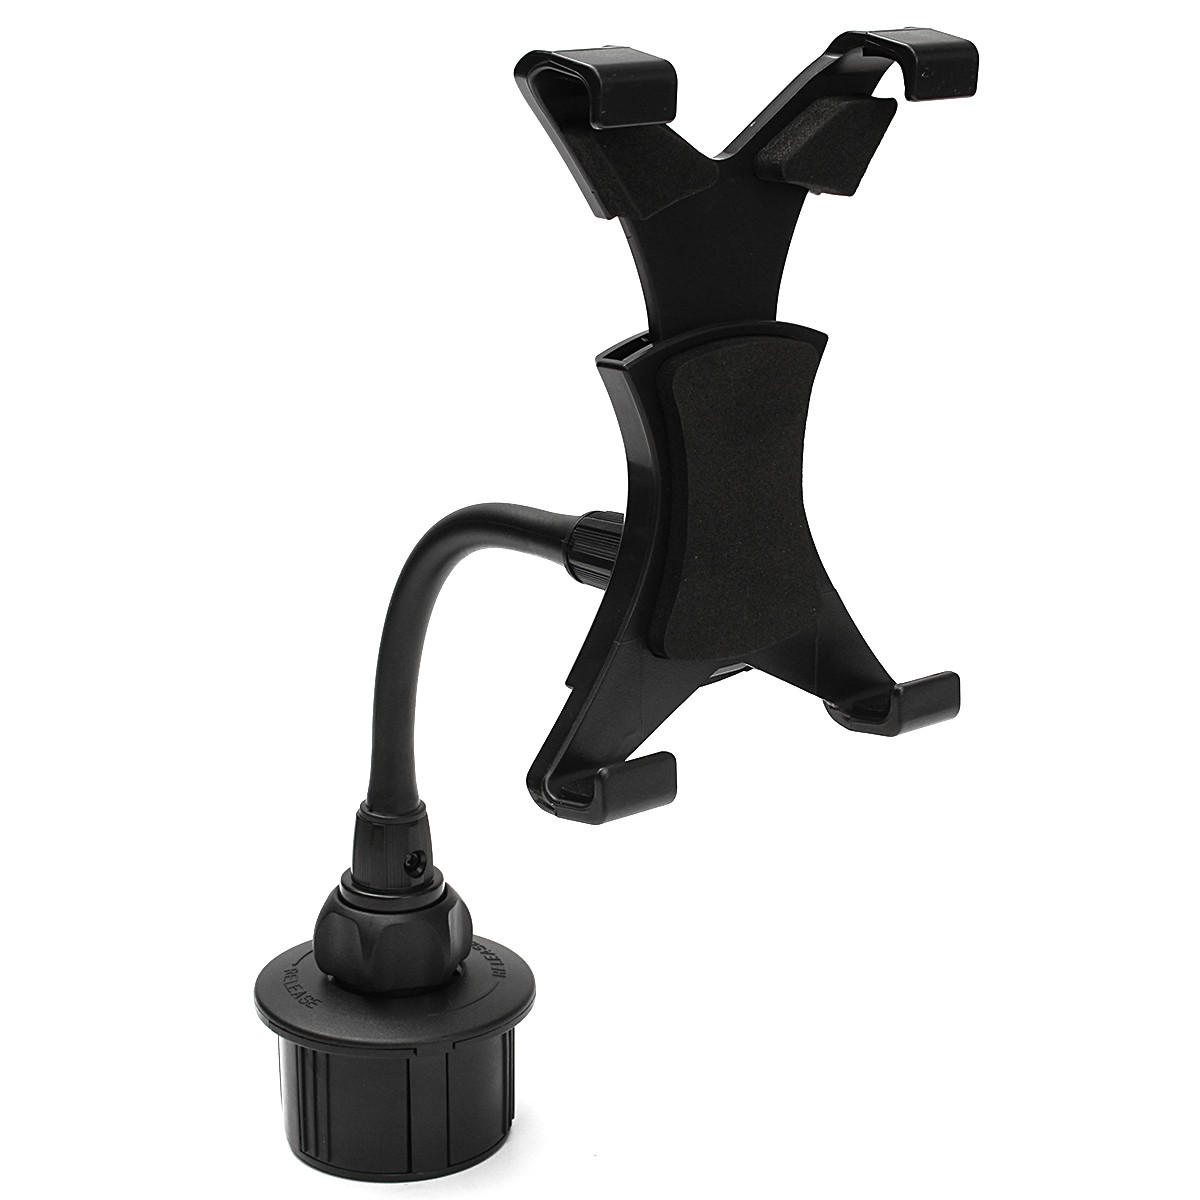 Adjustable-Bendy-Car-Cup-Holder-Mount-for-7-Inch-to-10-Inch-Tablet-1115144-4